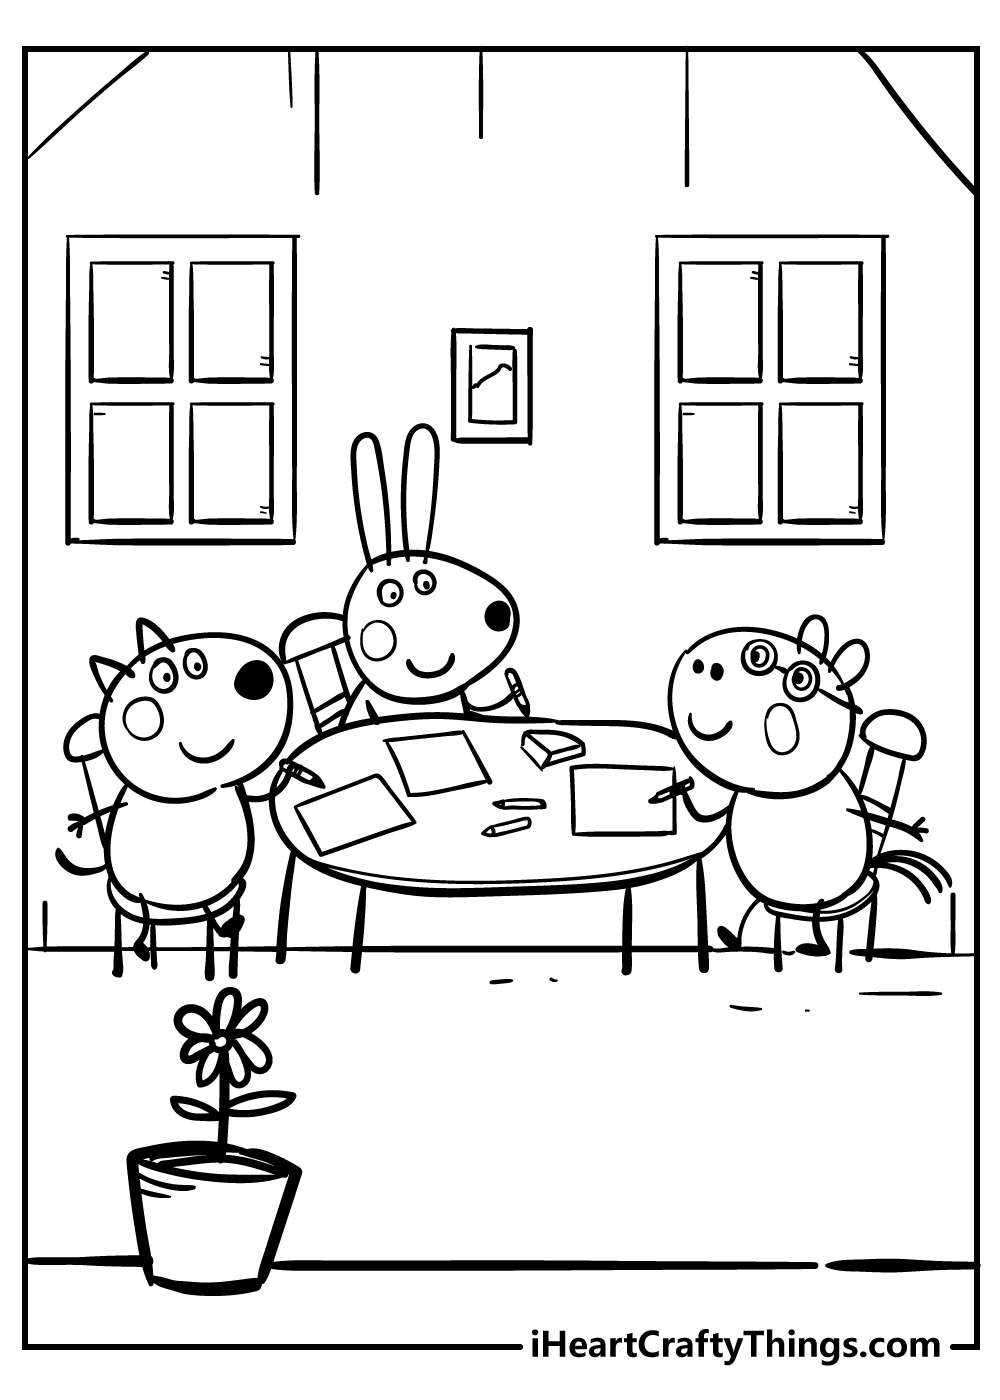 Peppa Pig coloring pages for kids free download